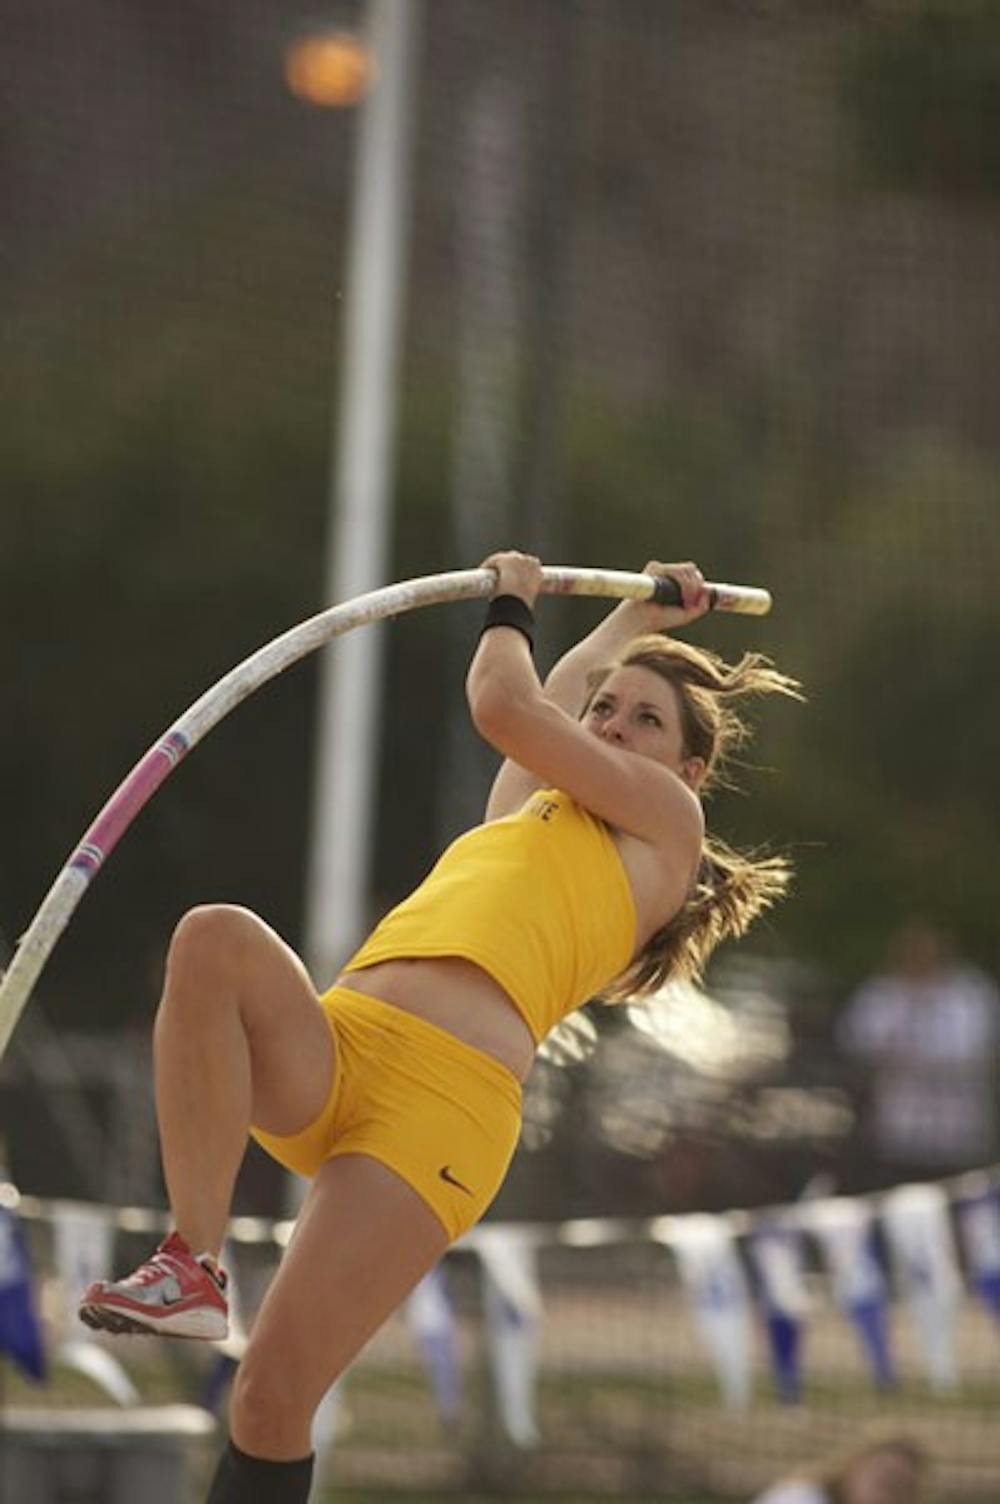 WE HAVE LIFTOFF: Sophomore pole vaulter Cara Carpenter starts her ascent at the Baldy Castillo Invite on March 20 at Sun Angel Stadium. (Photo by Michael Arellano)